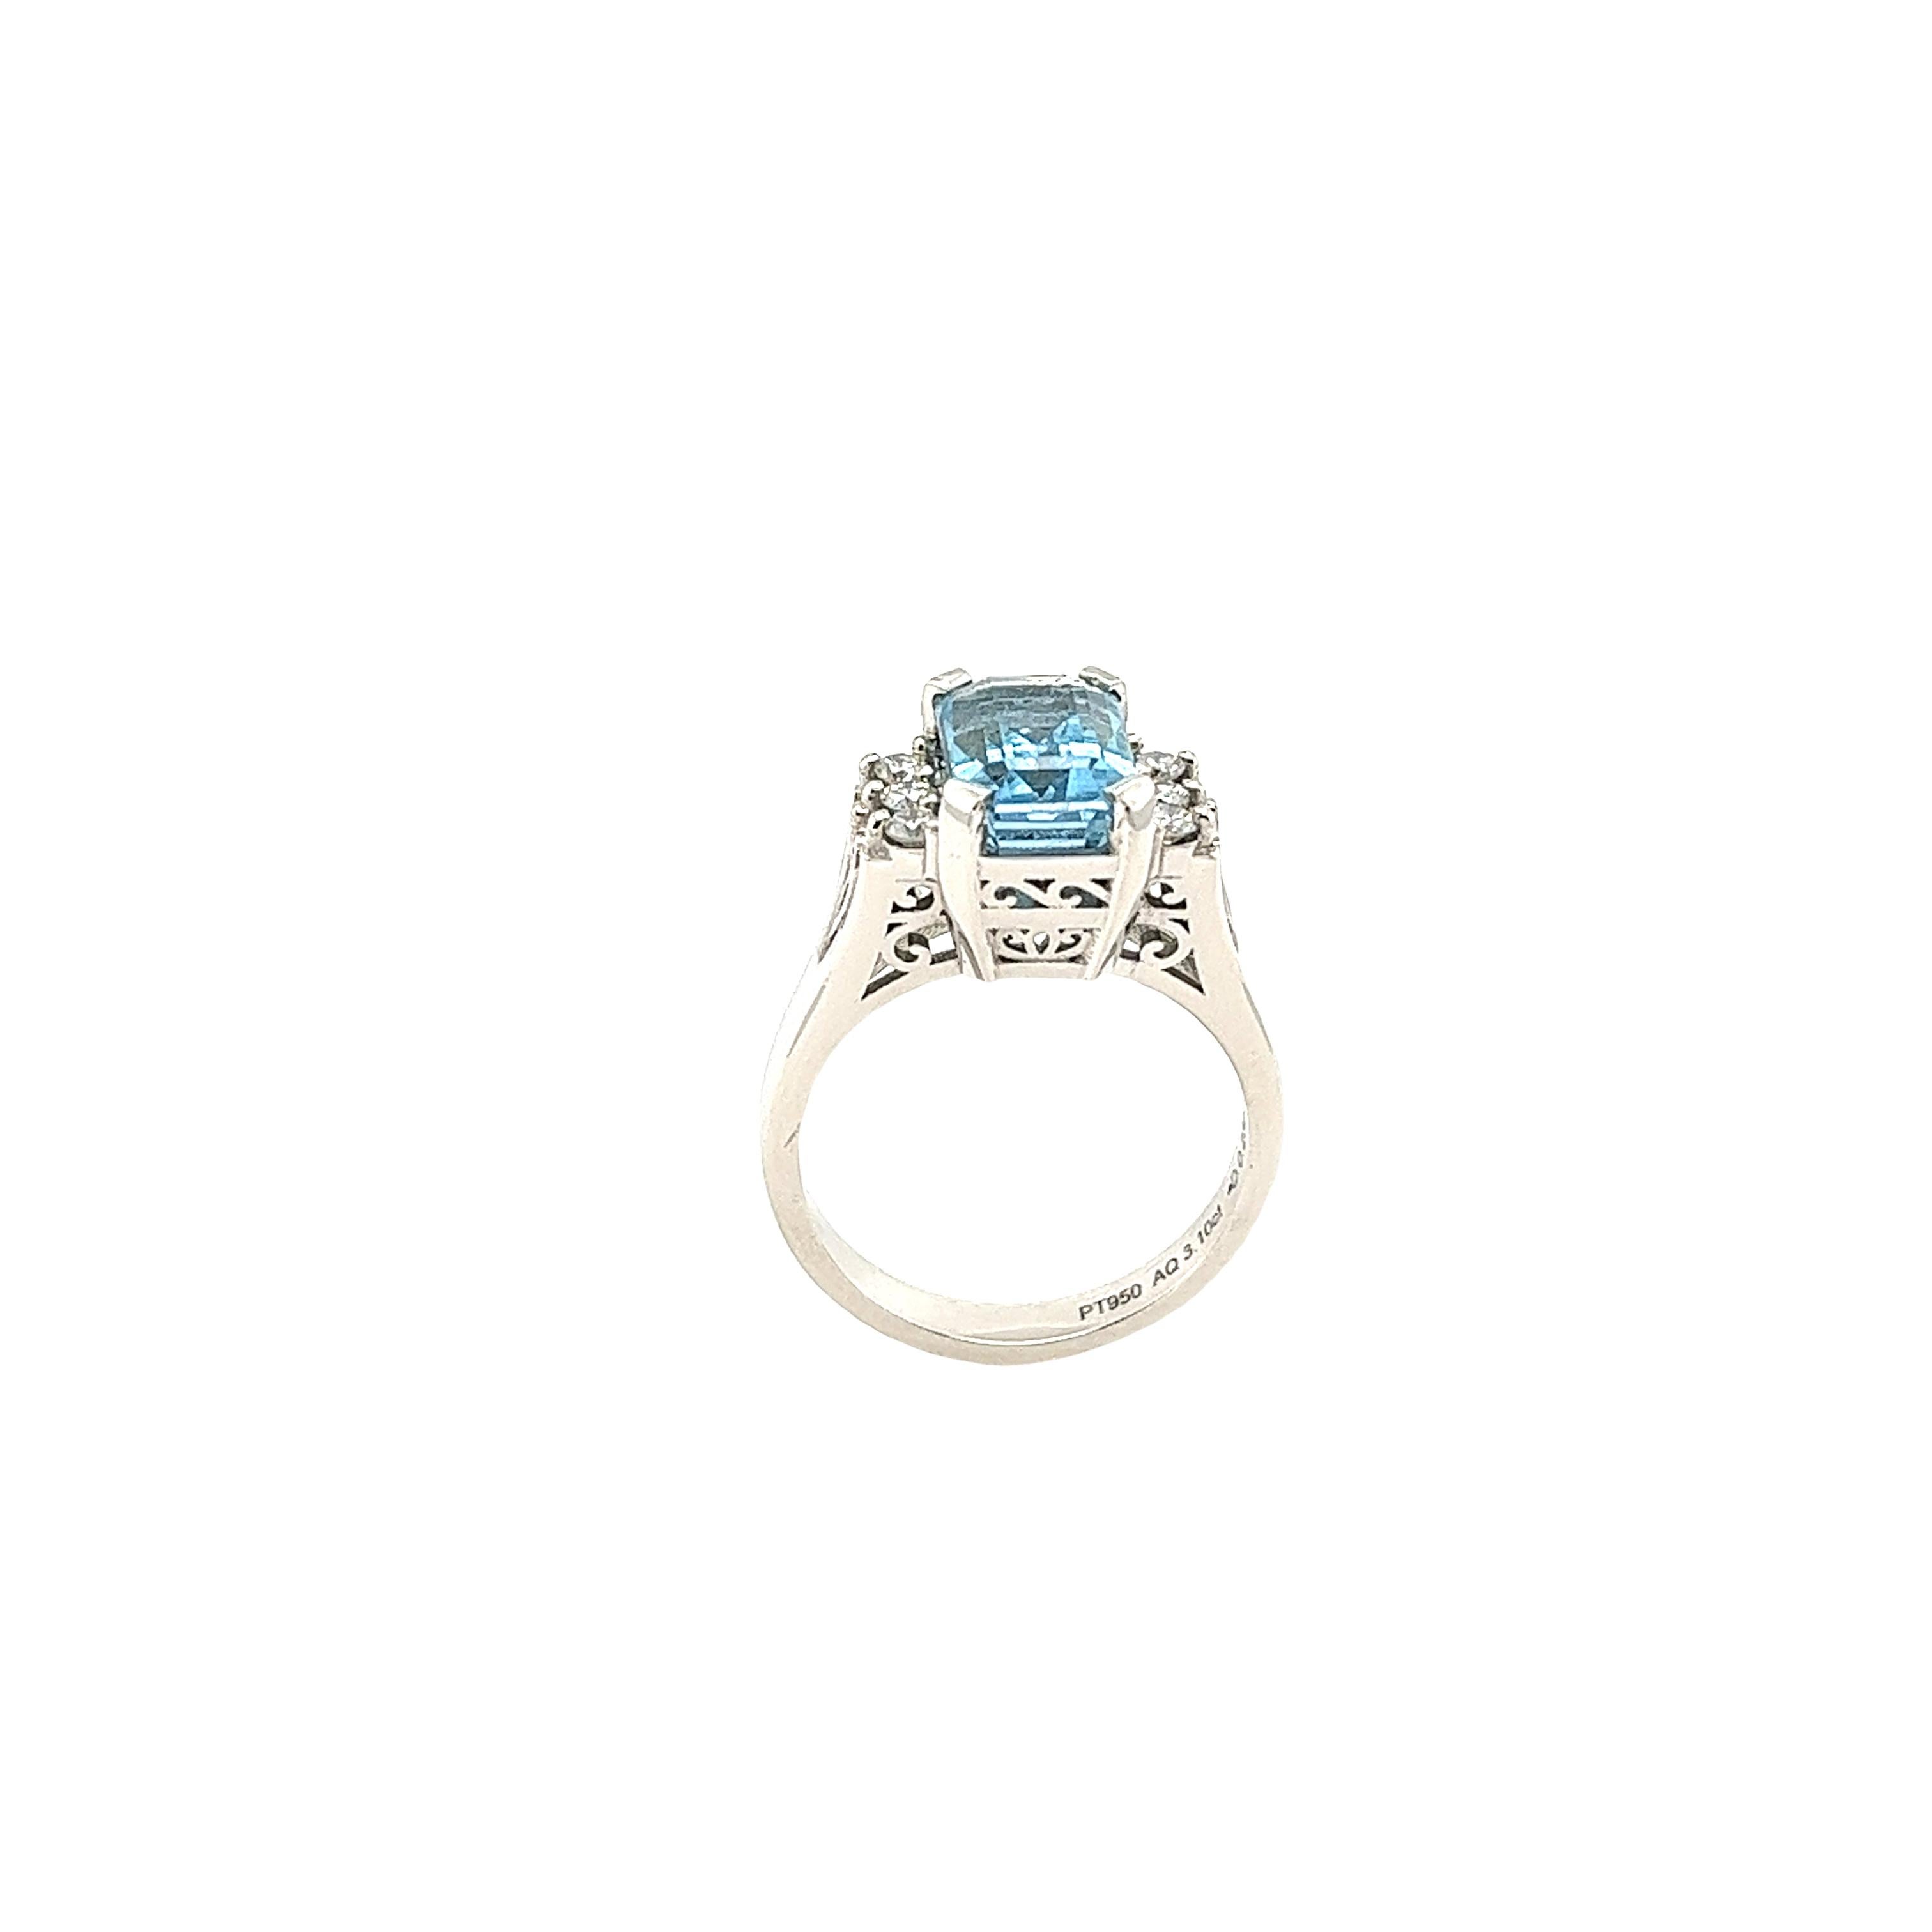 Triple AAA Emerald Cut 3.10ct Aquamarine Ring With 3 Diamonds on Sides
This beautiful ring features a AAA 3.10ct emerald cut Aquamarine with 3 Round Brilliant Cut Diamonds on sides, set in Platinum band. The Aquamarine is the birthstone for March,